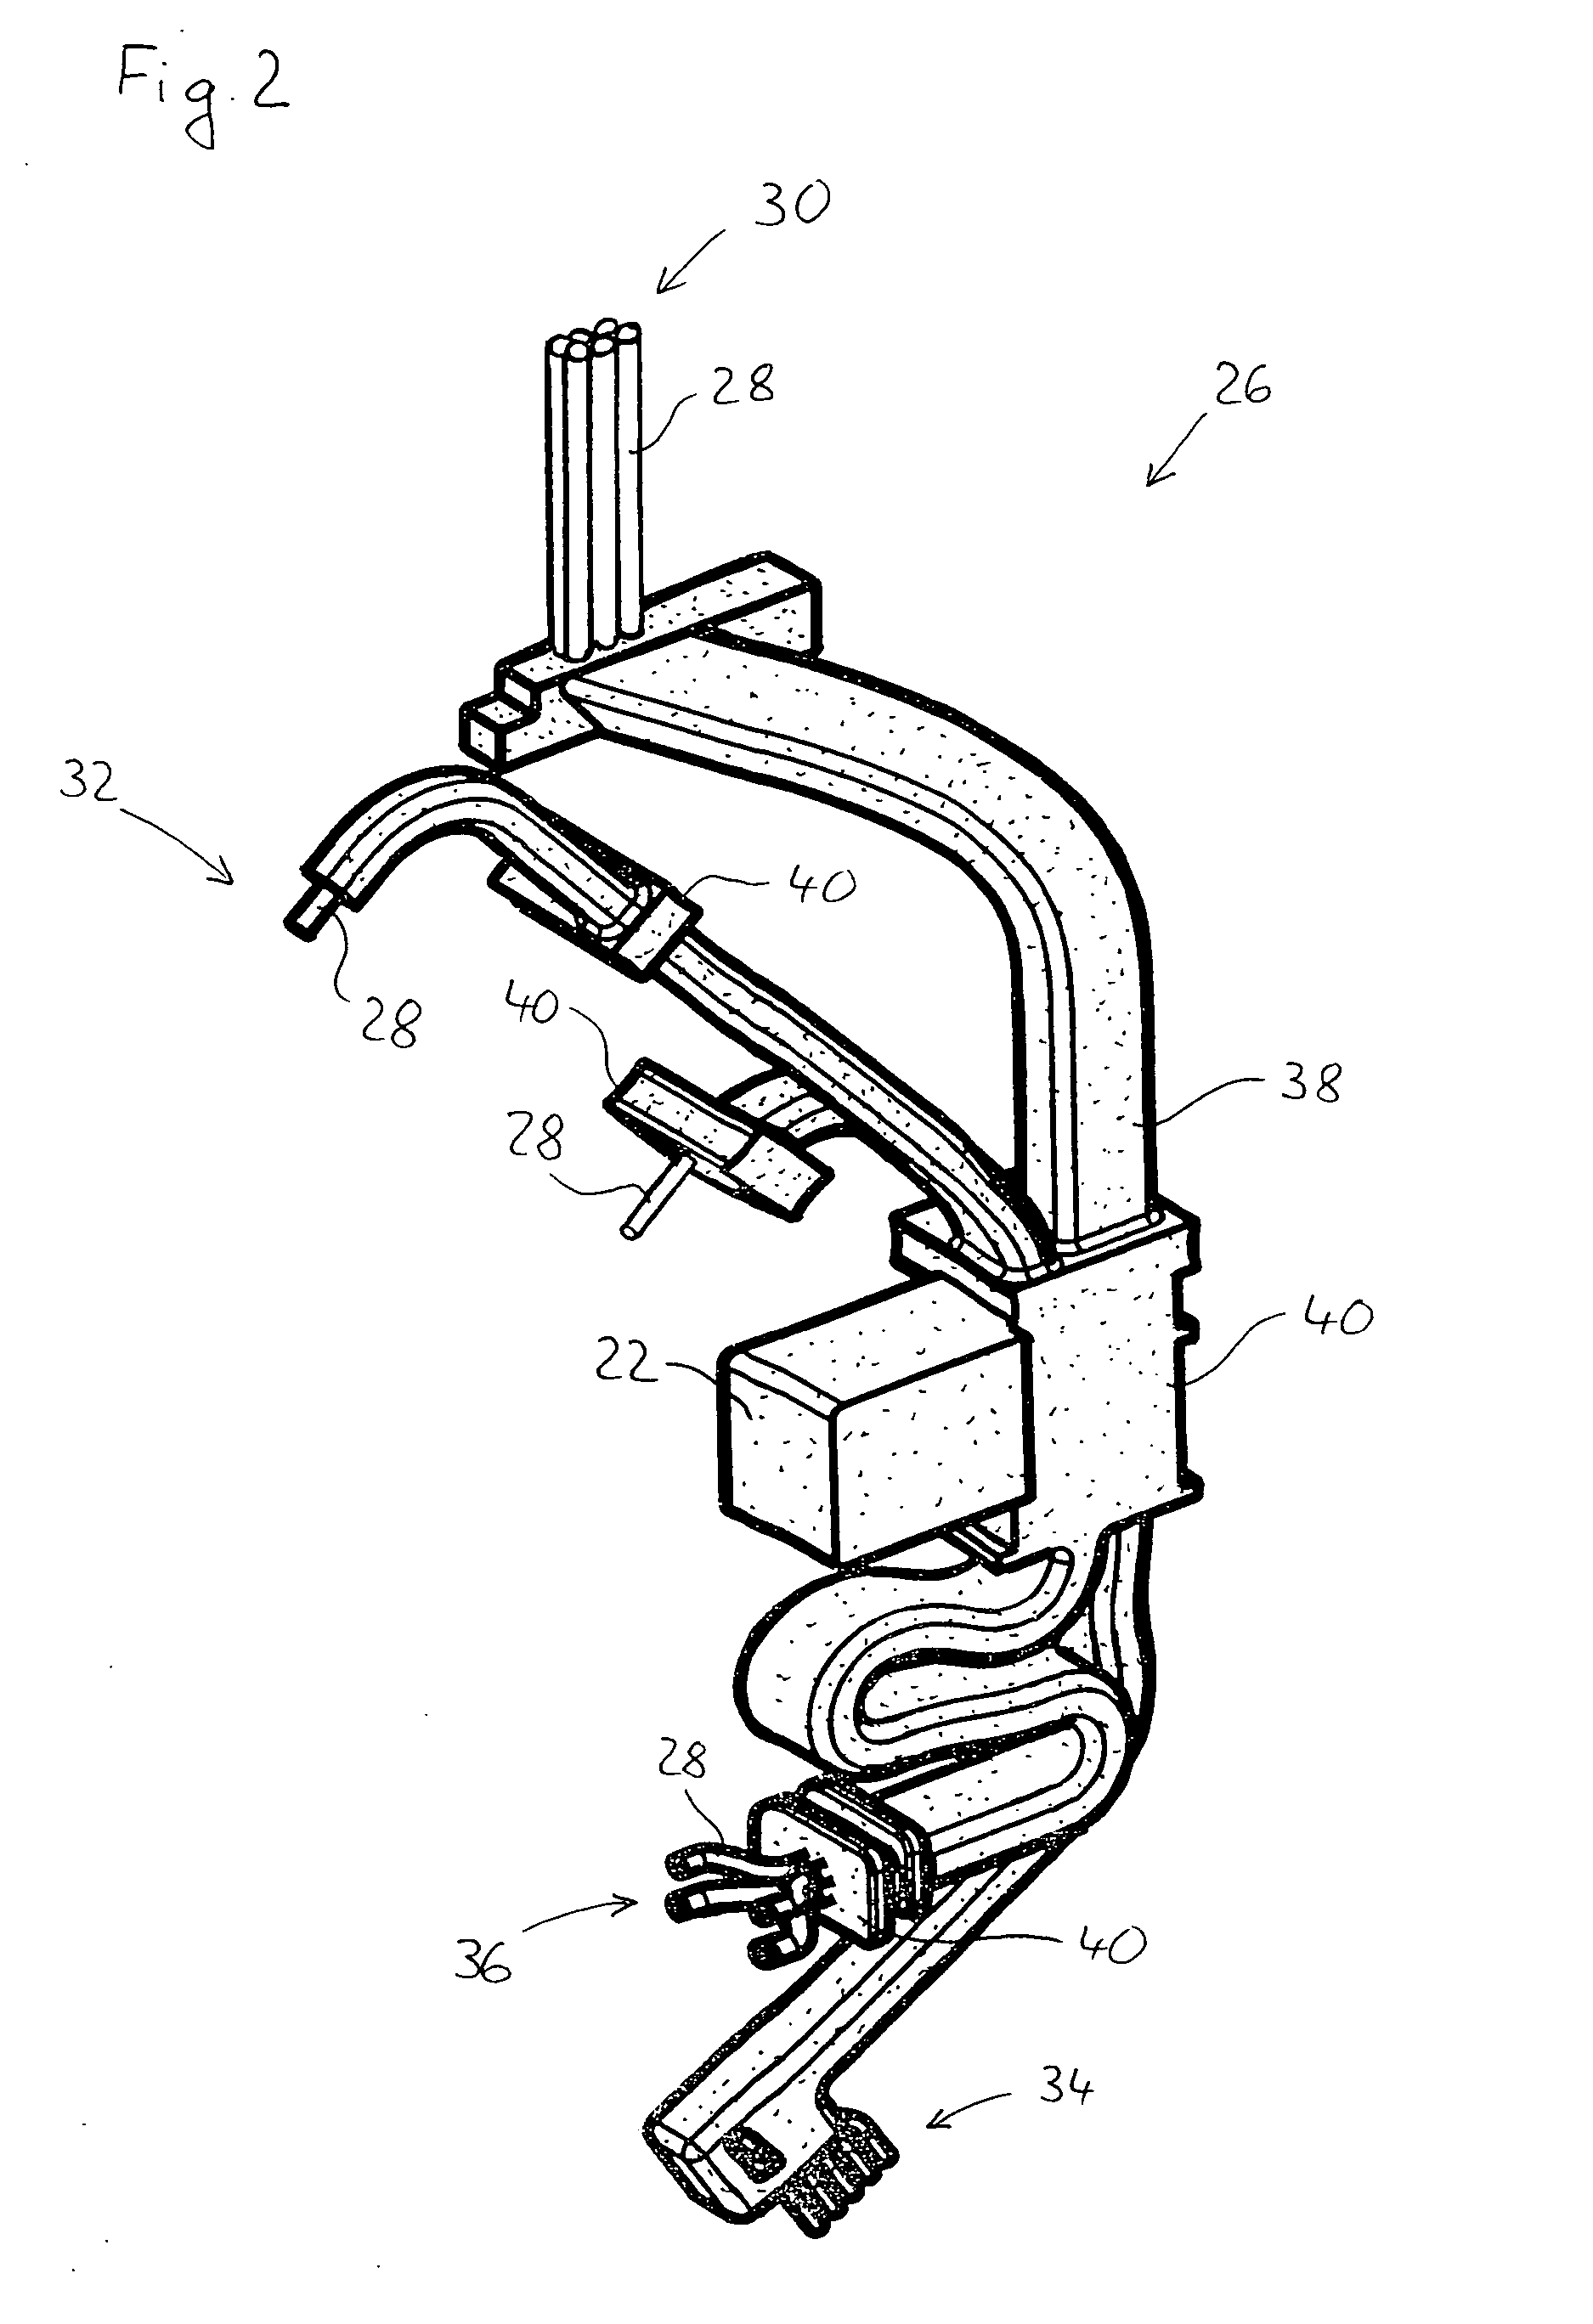 Hand-held power tool with foamed cabling